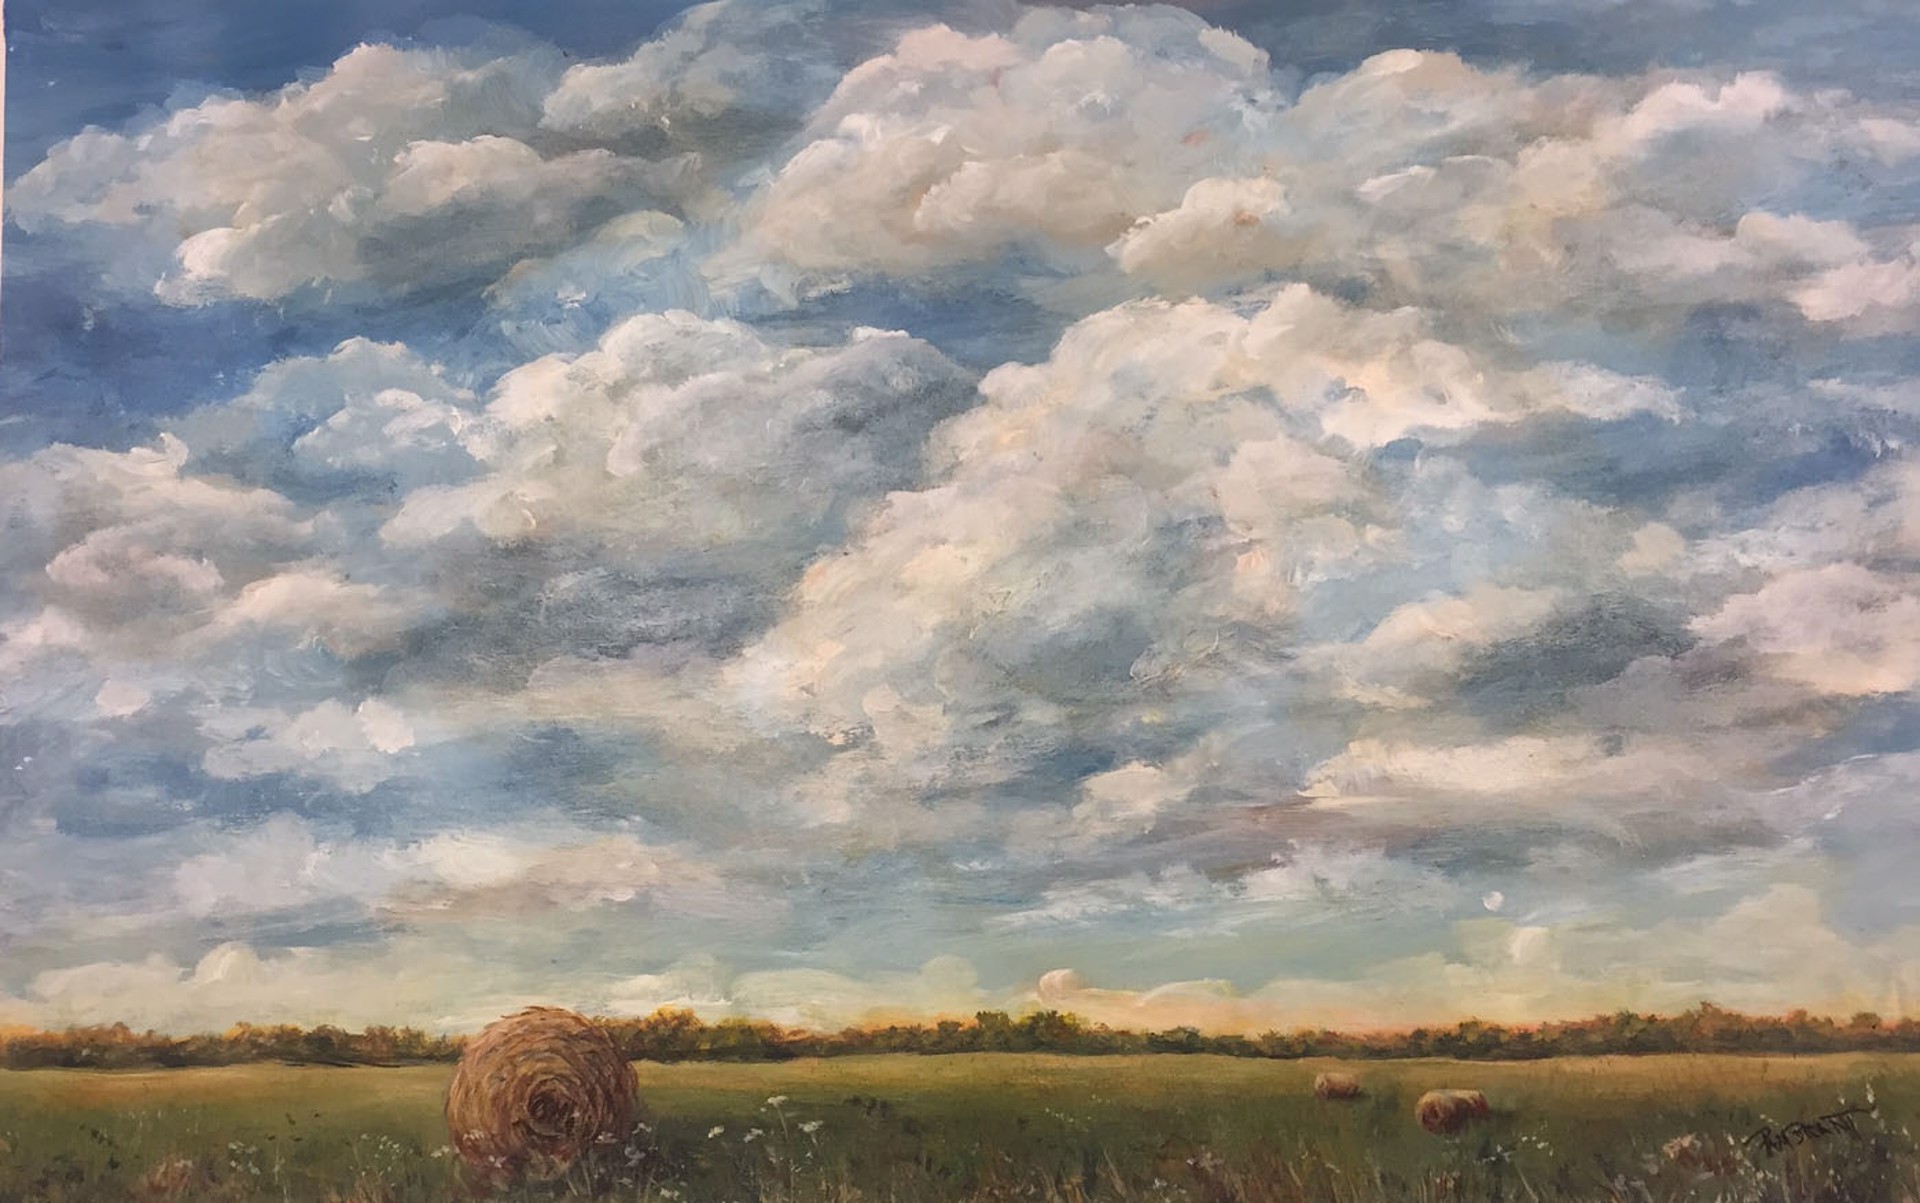 Big Bales by Pam Brant